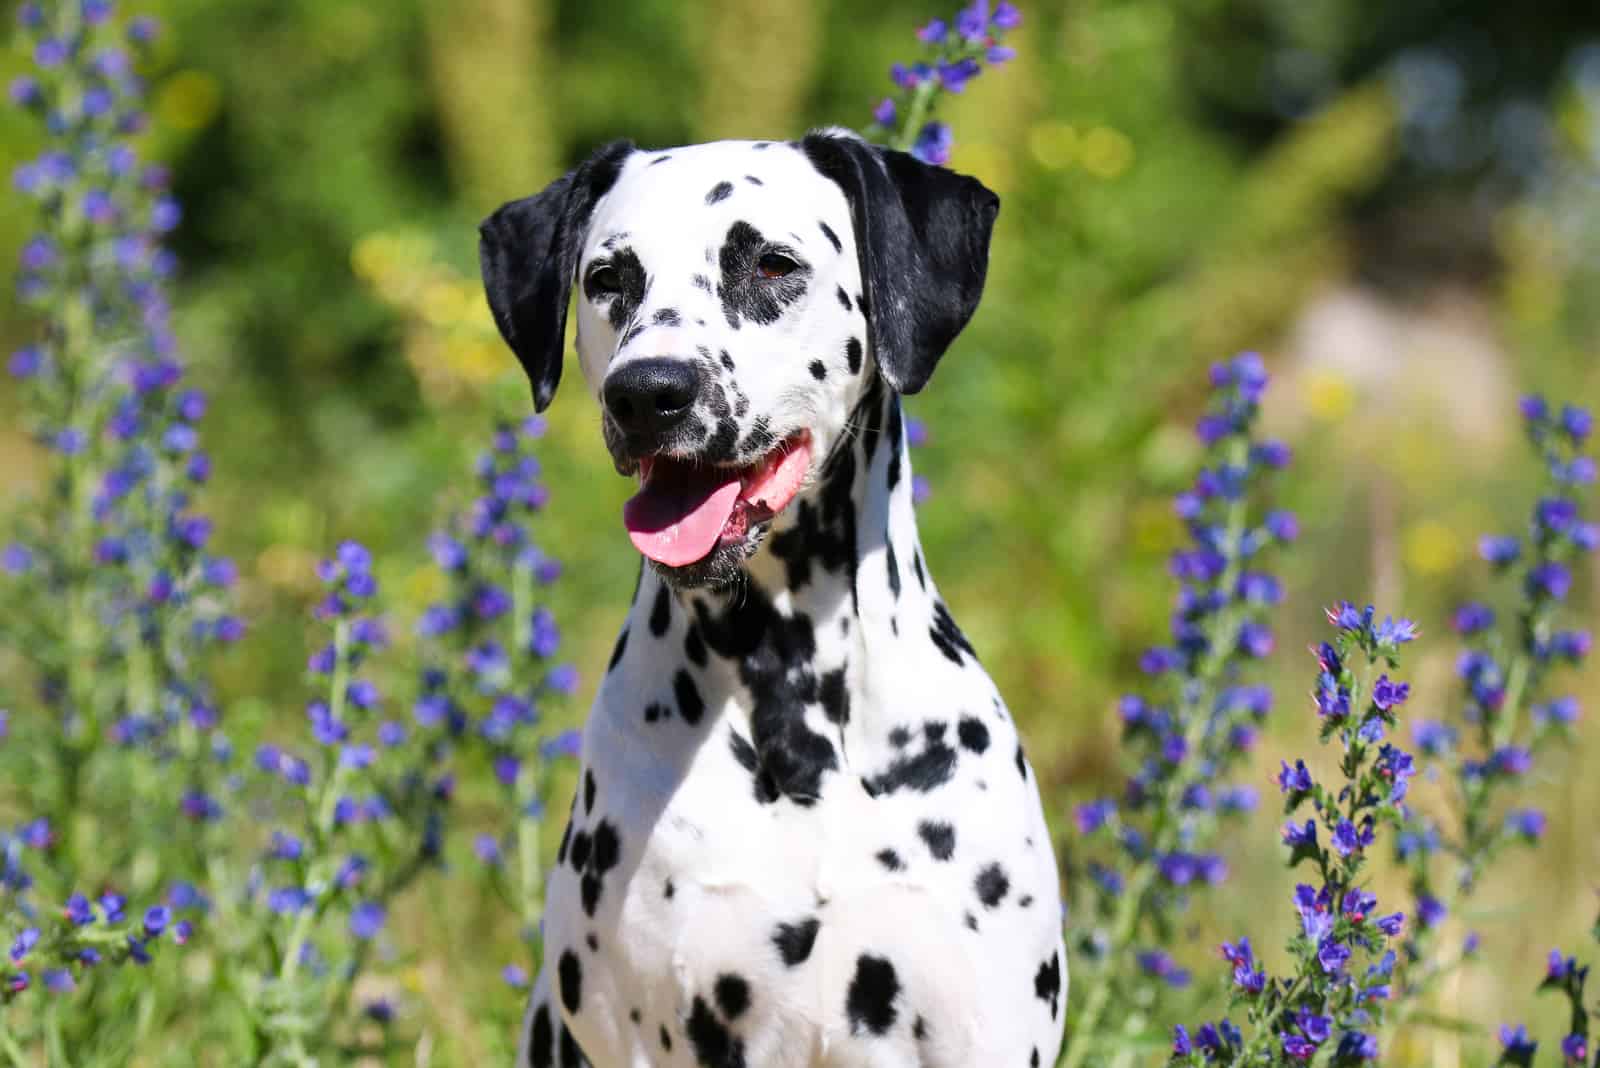 smiling dalmatian dog with black spots